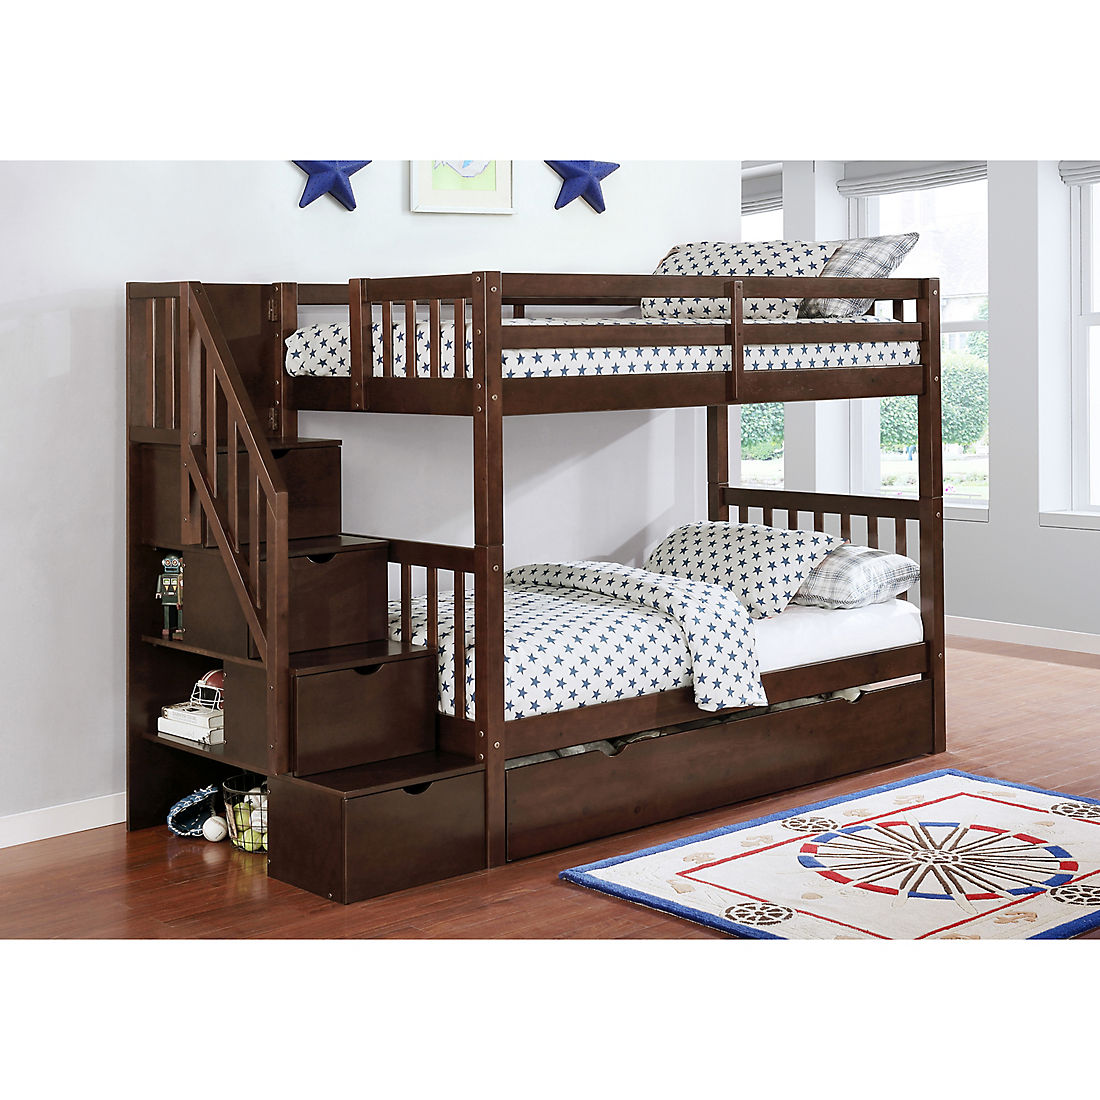 Berkley Jensen Twin Over Stairway, A Picture Of A Bunk Bed